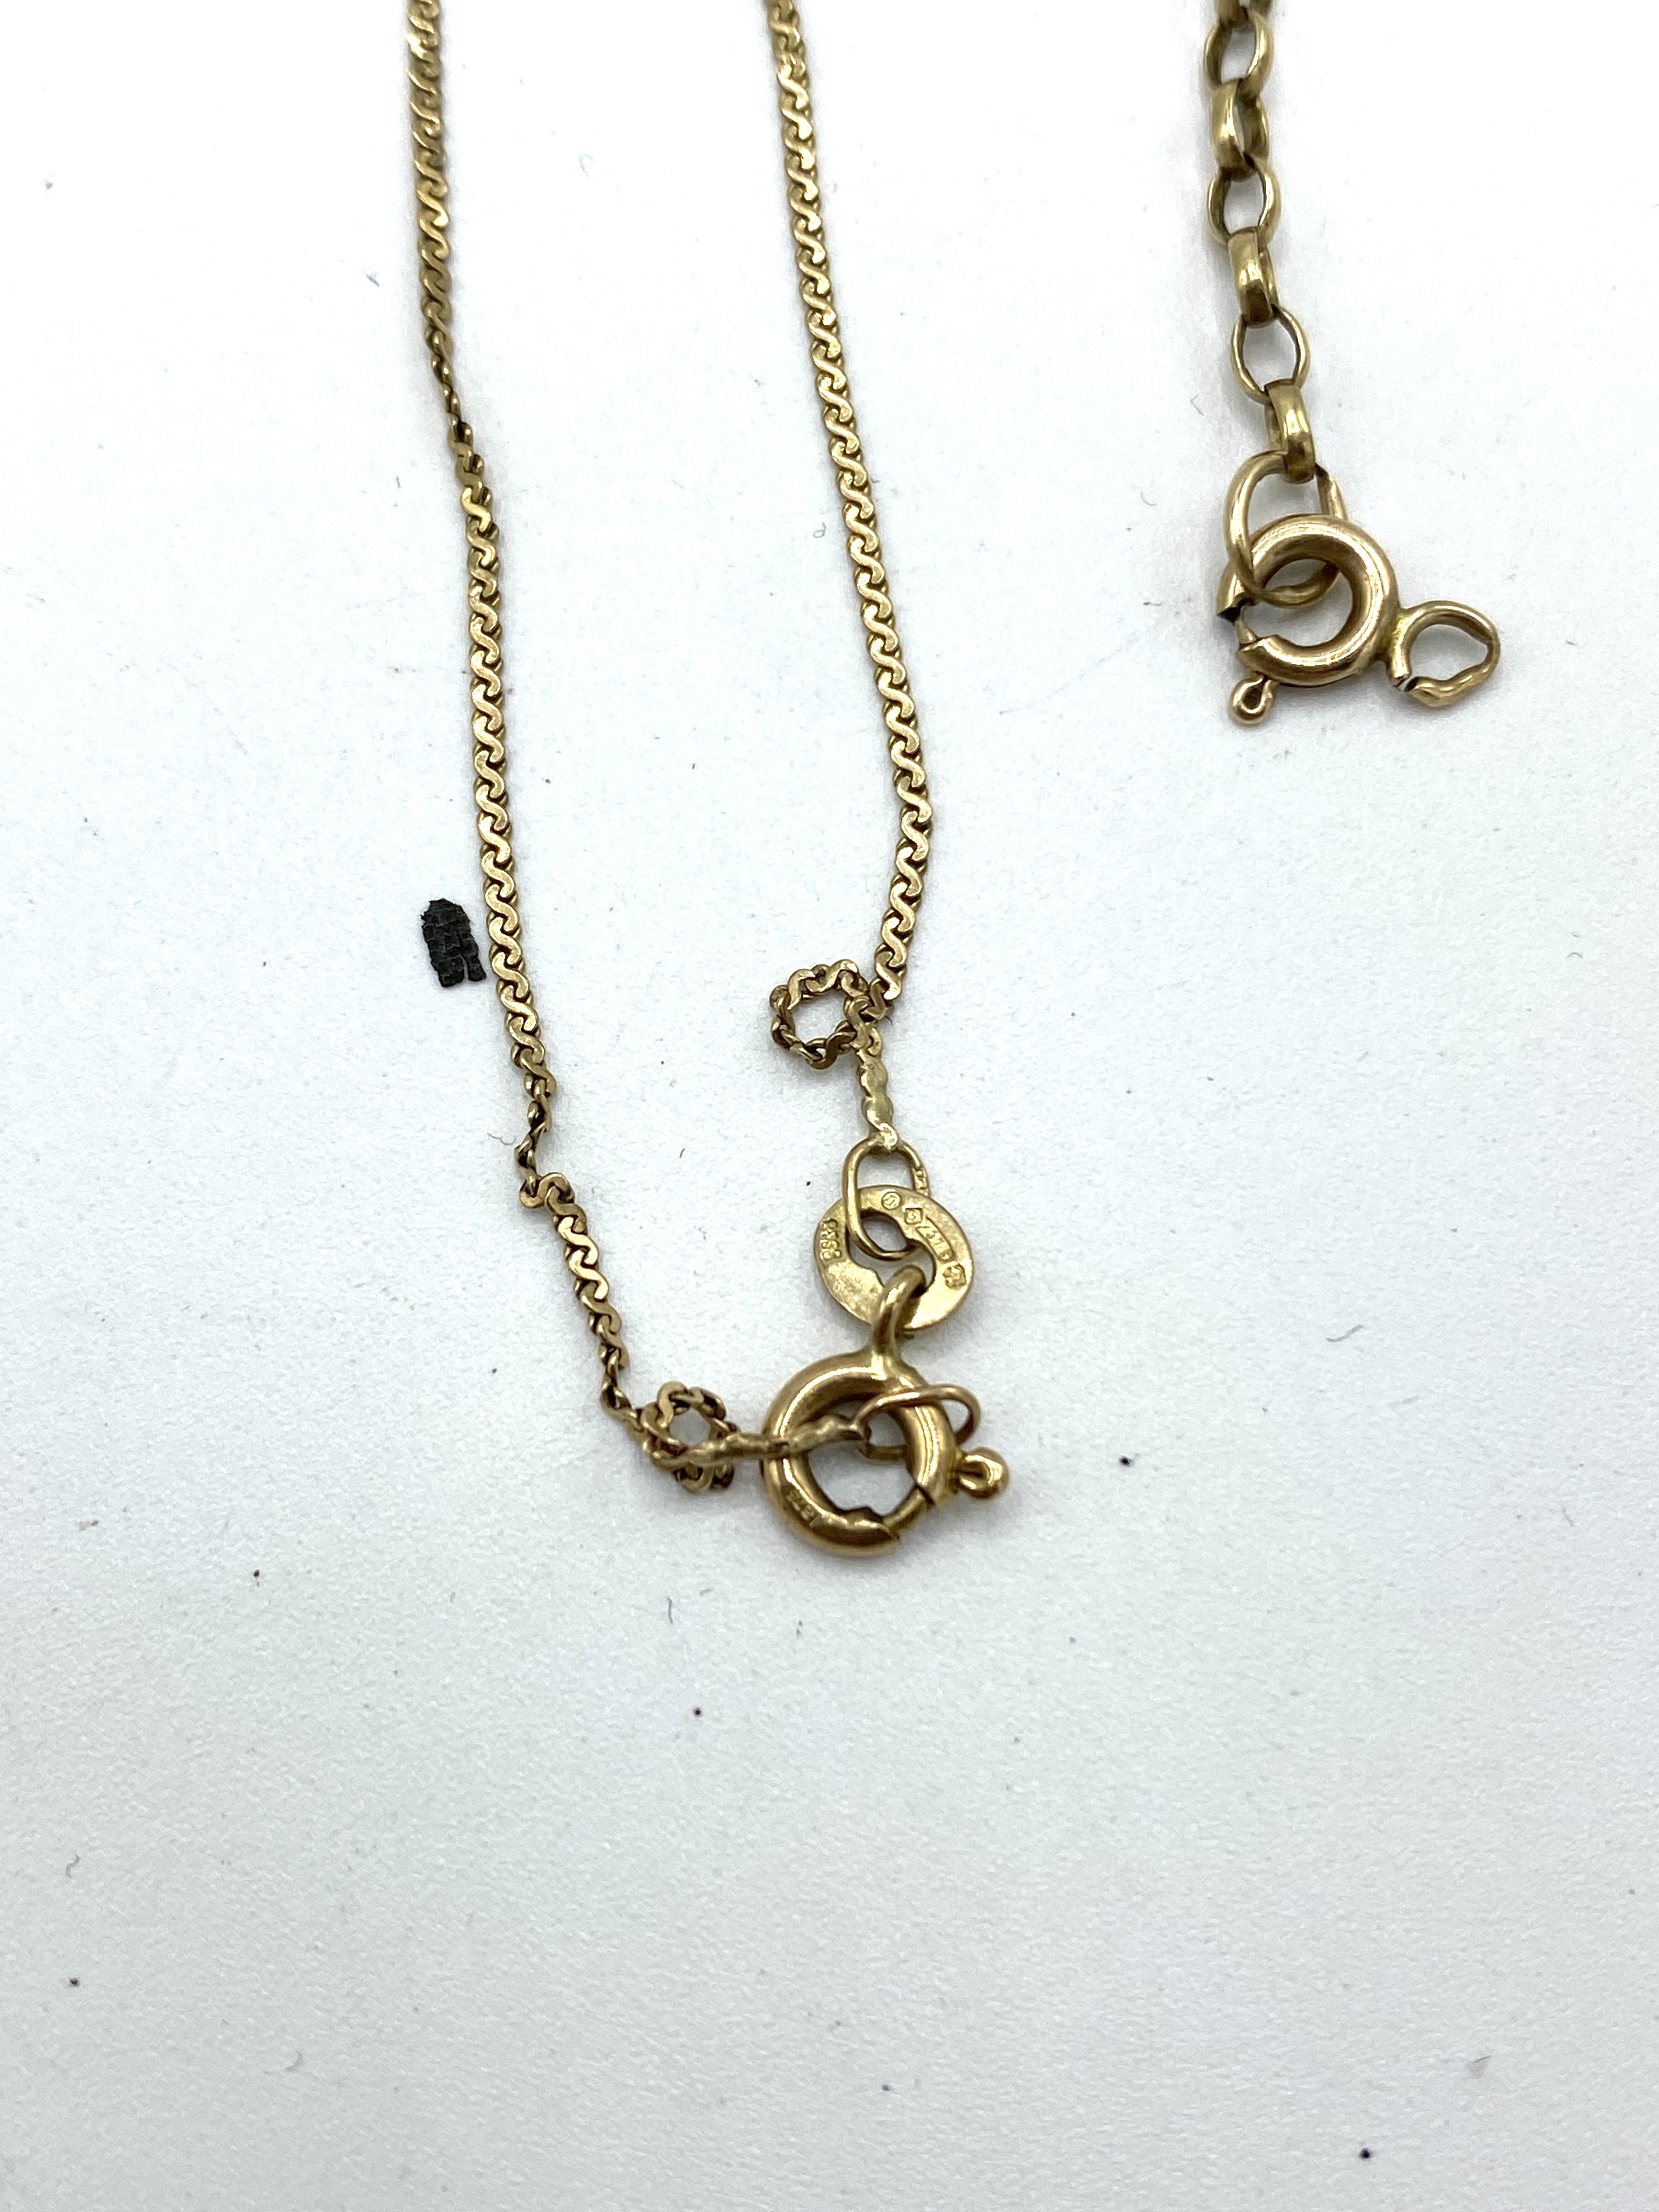 Four 9ct gold chains - Image 4 of 5